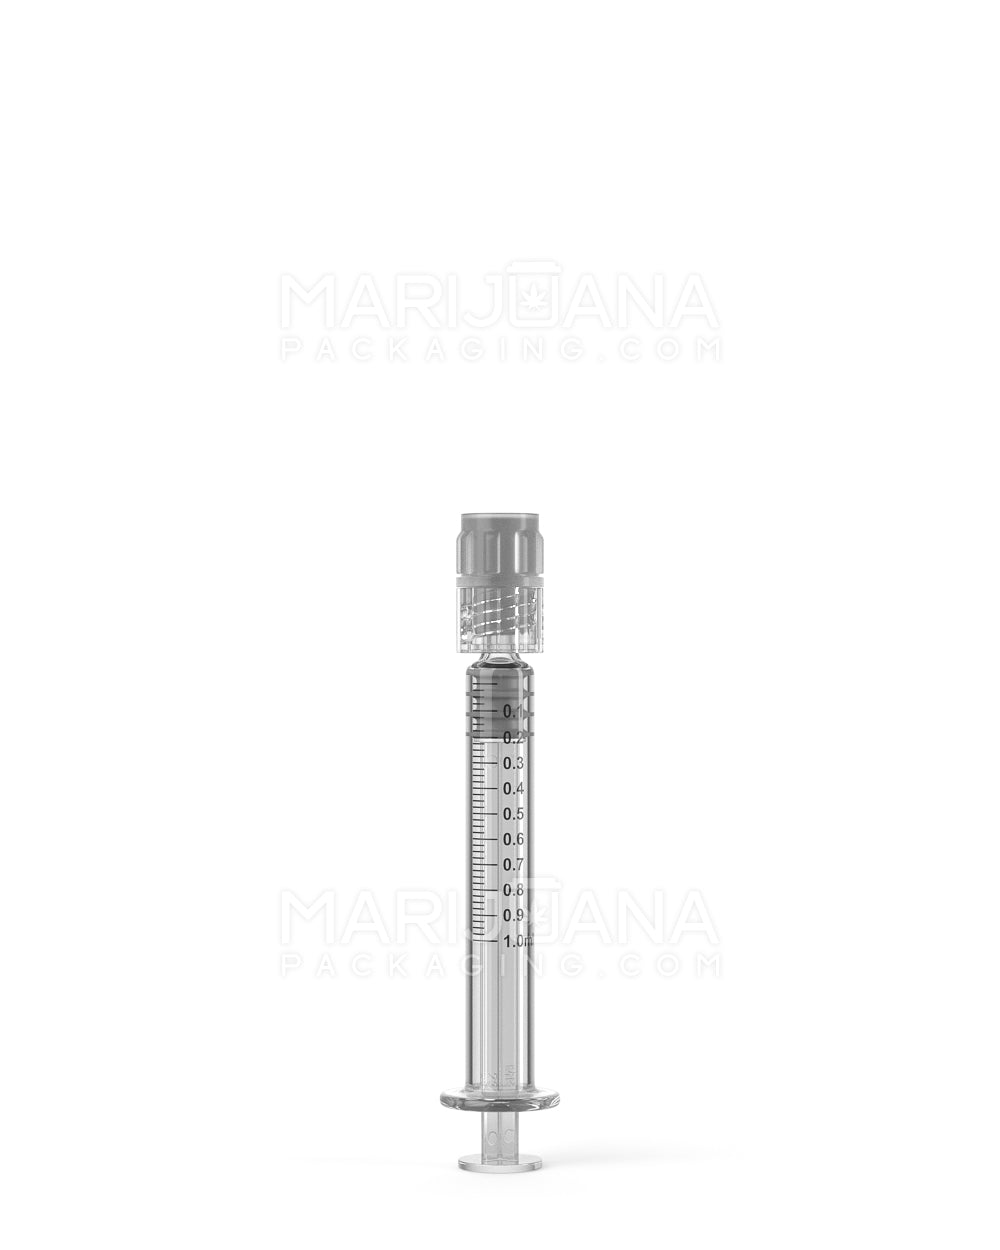 Luer Lock | Long Glass Dab Applicator Syringes | 1mL - 0.1mL Increments - 100 Count - 8